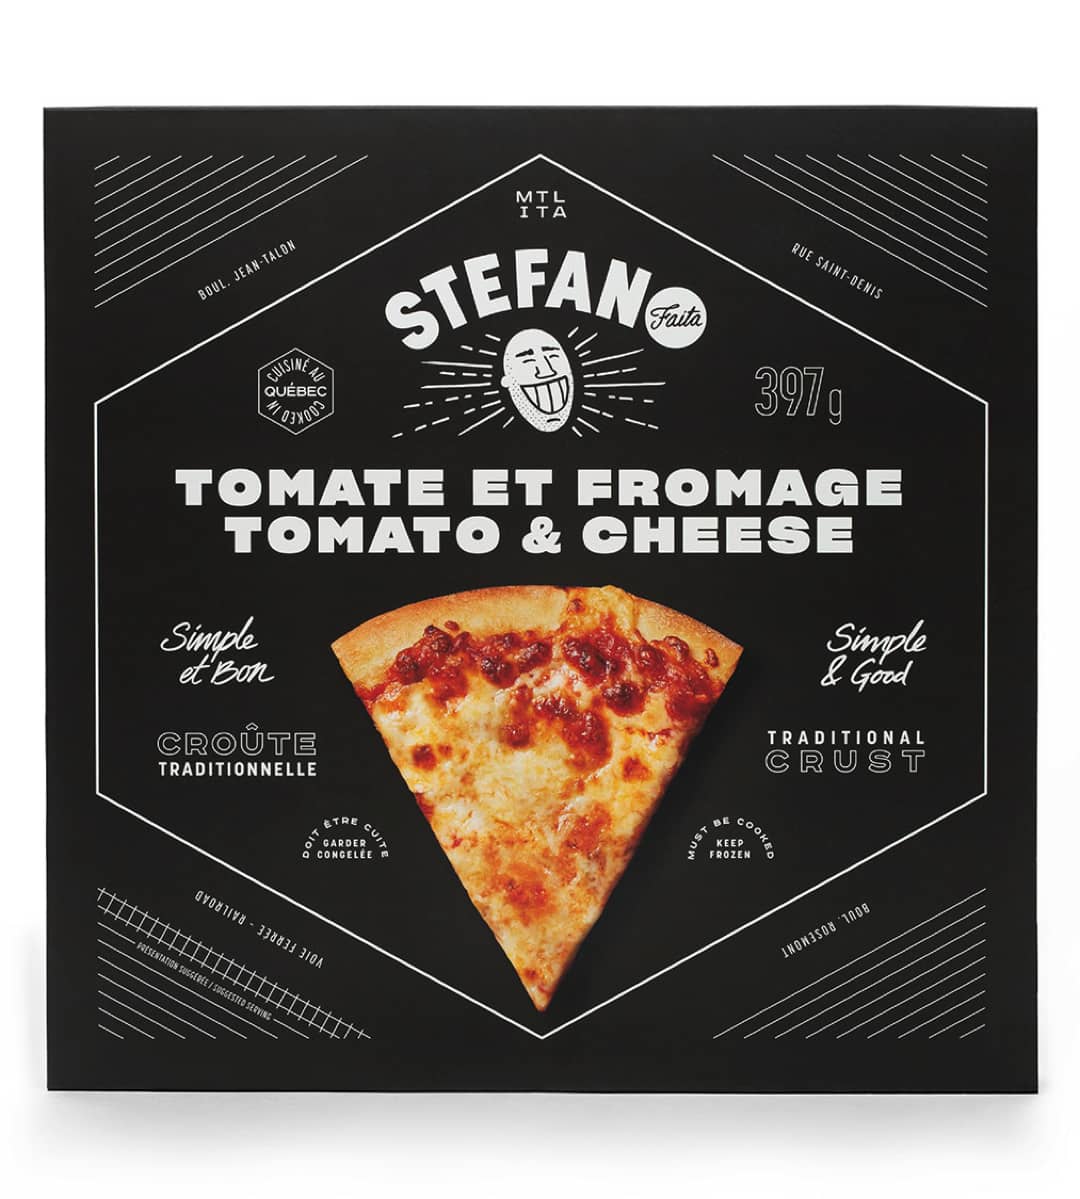 TOMATE ET FROMAGE